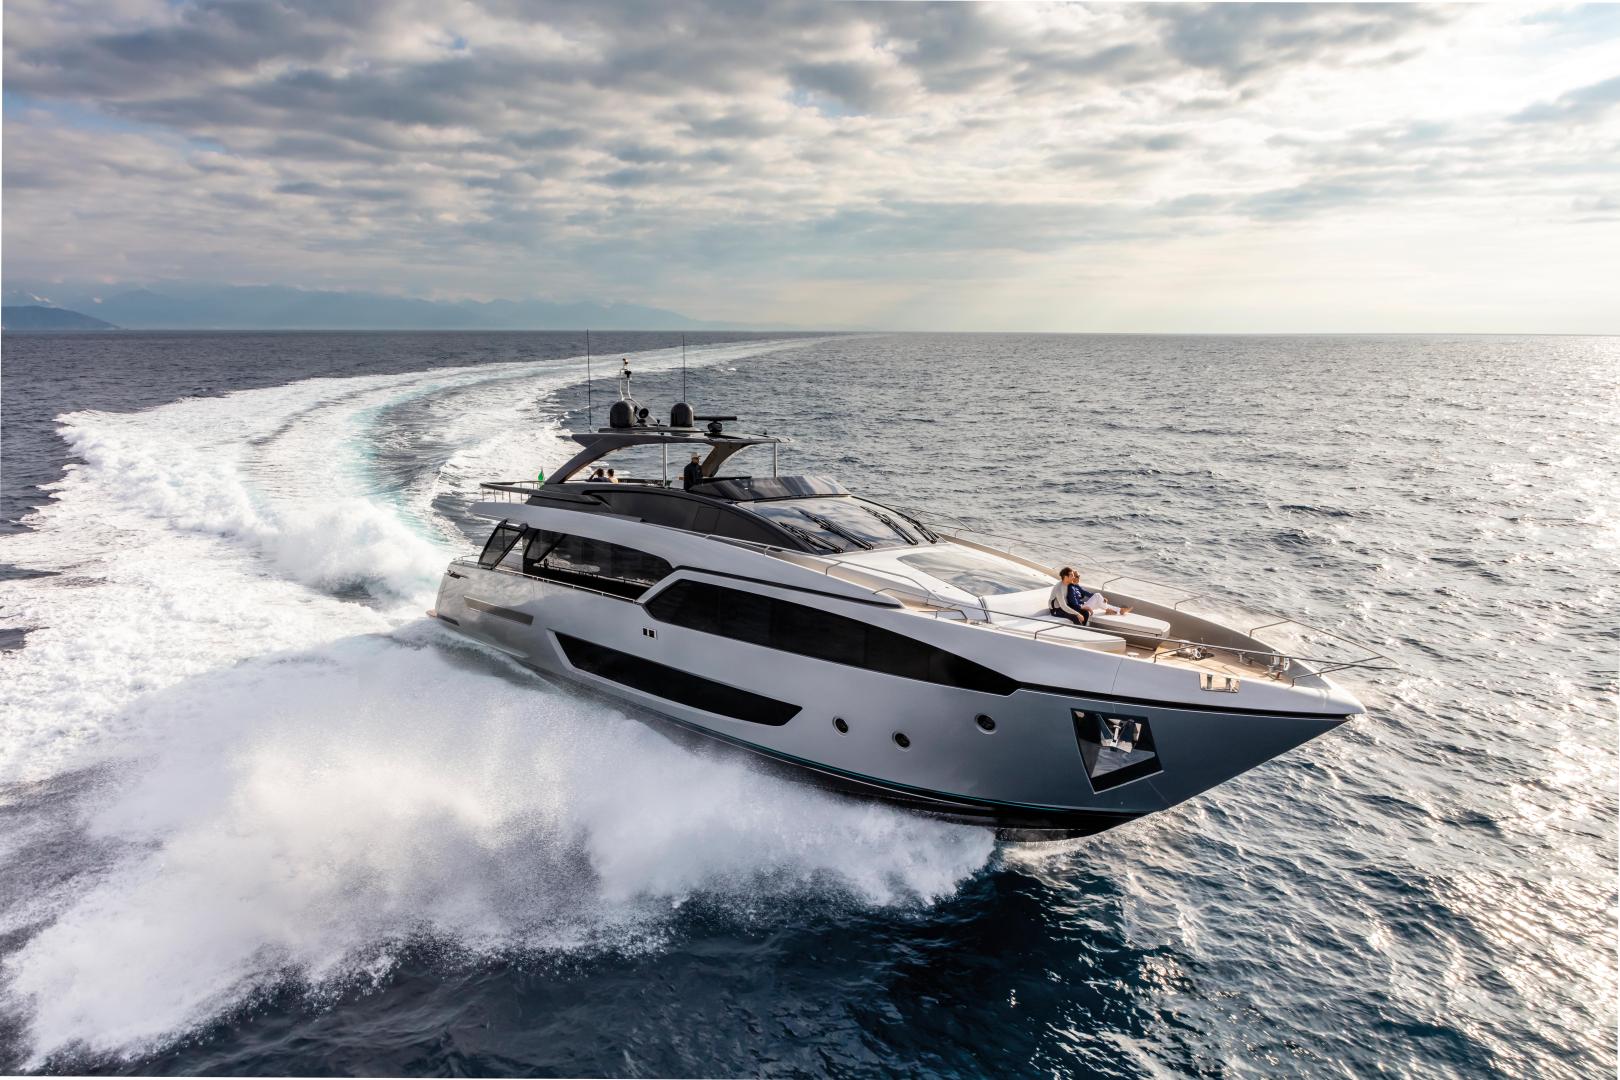 Riva 90’ Argo: A new legend of beauty and innovation